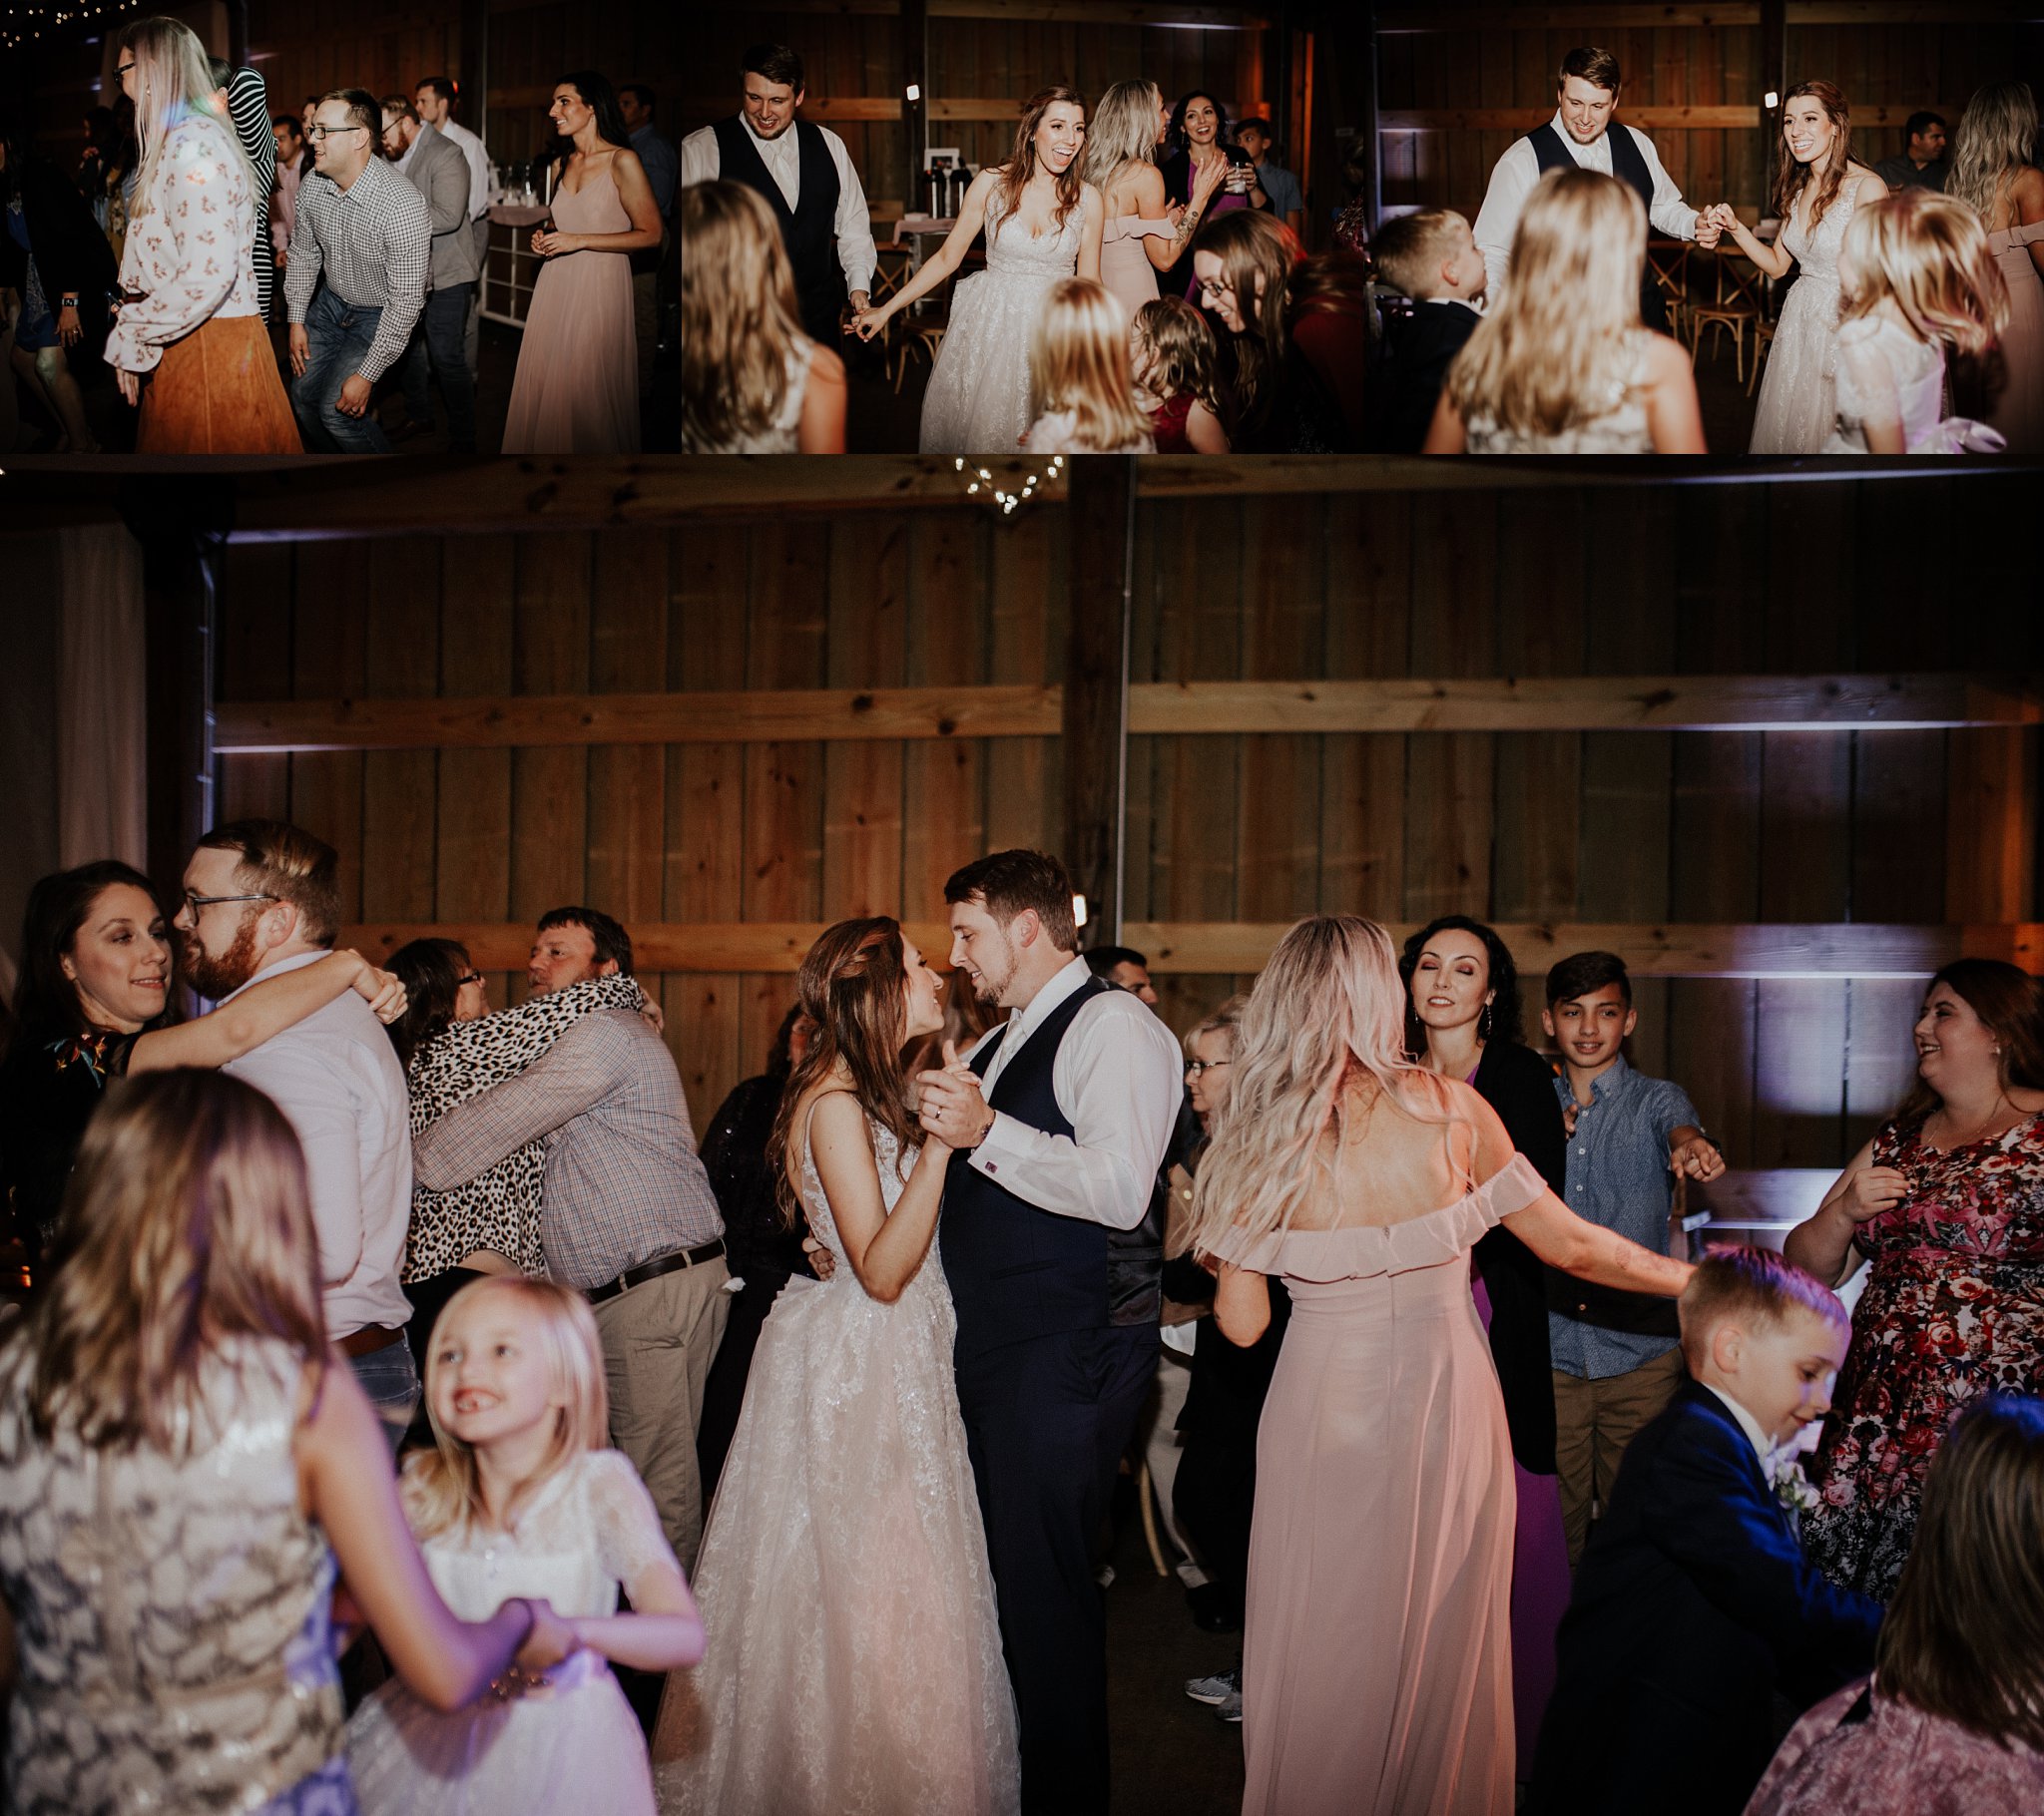 Clifford and Ashley are surrounded by family and friends while dancing at their reception